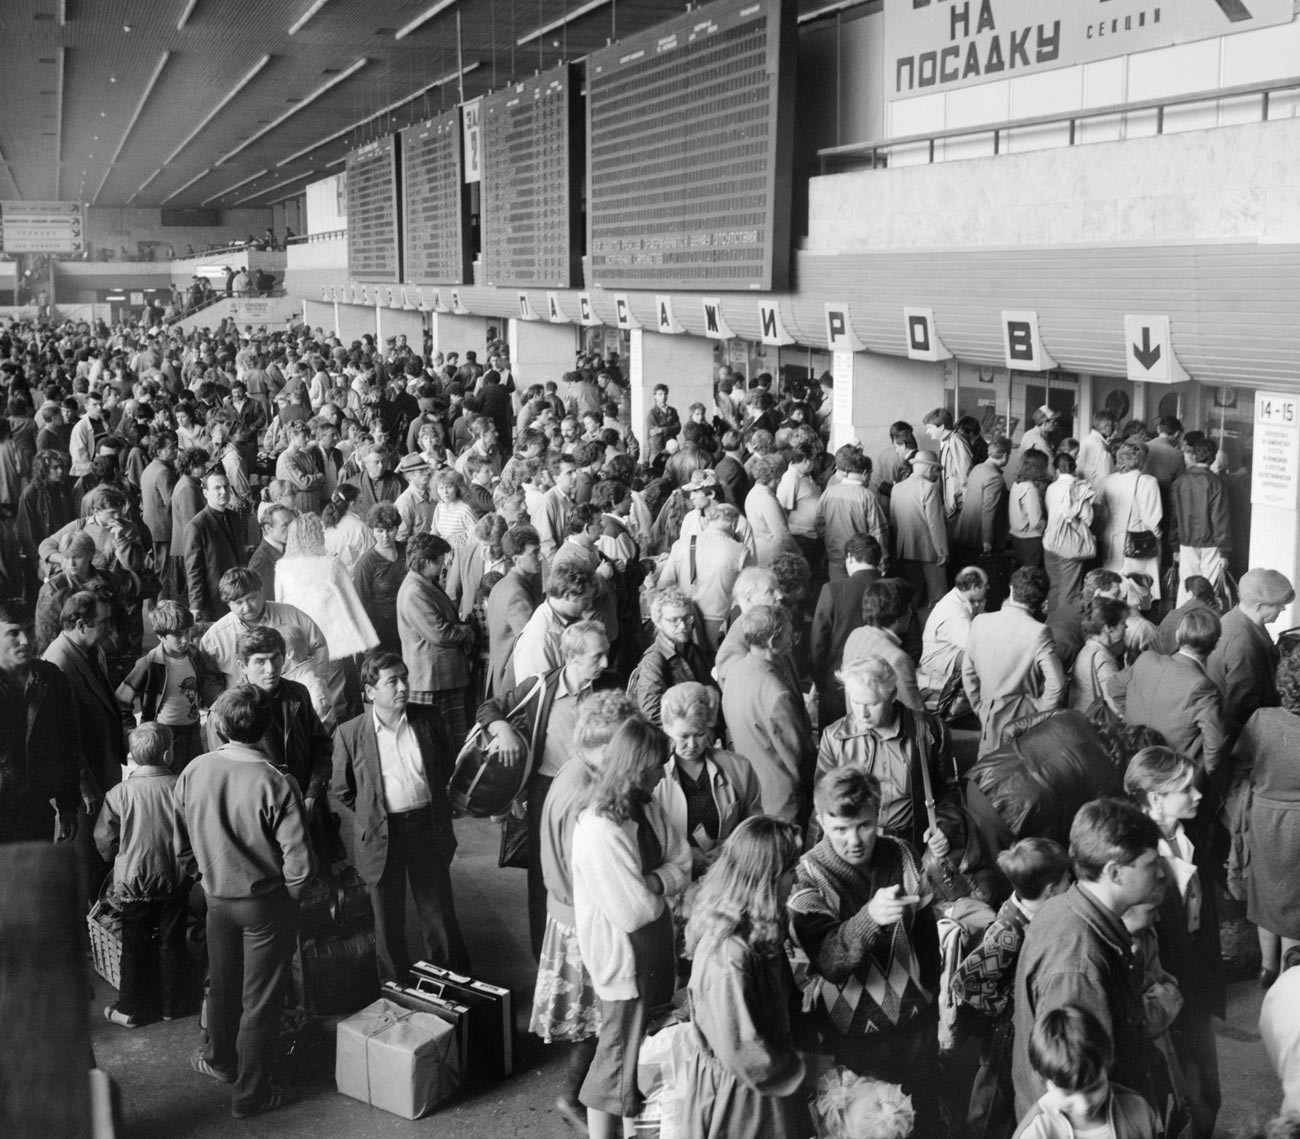 USSR. Moscow. June 8, 1990. Delayed flights due to lack of serviceable aircraft.